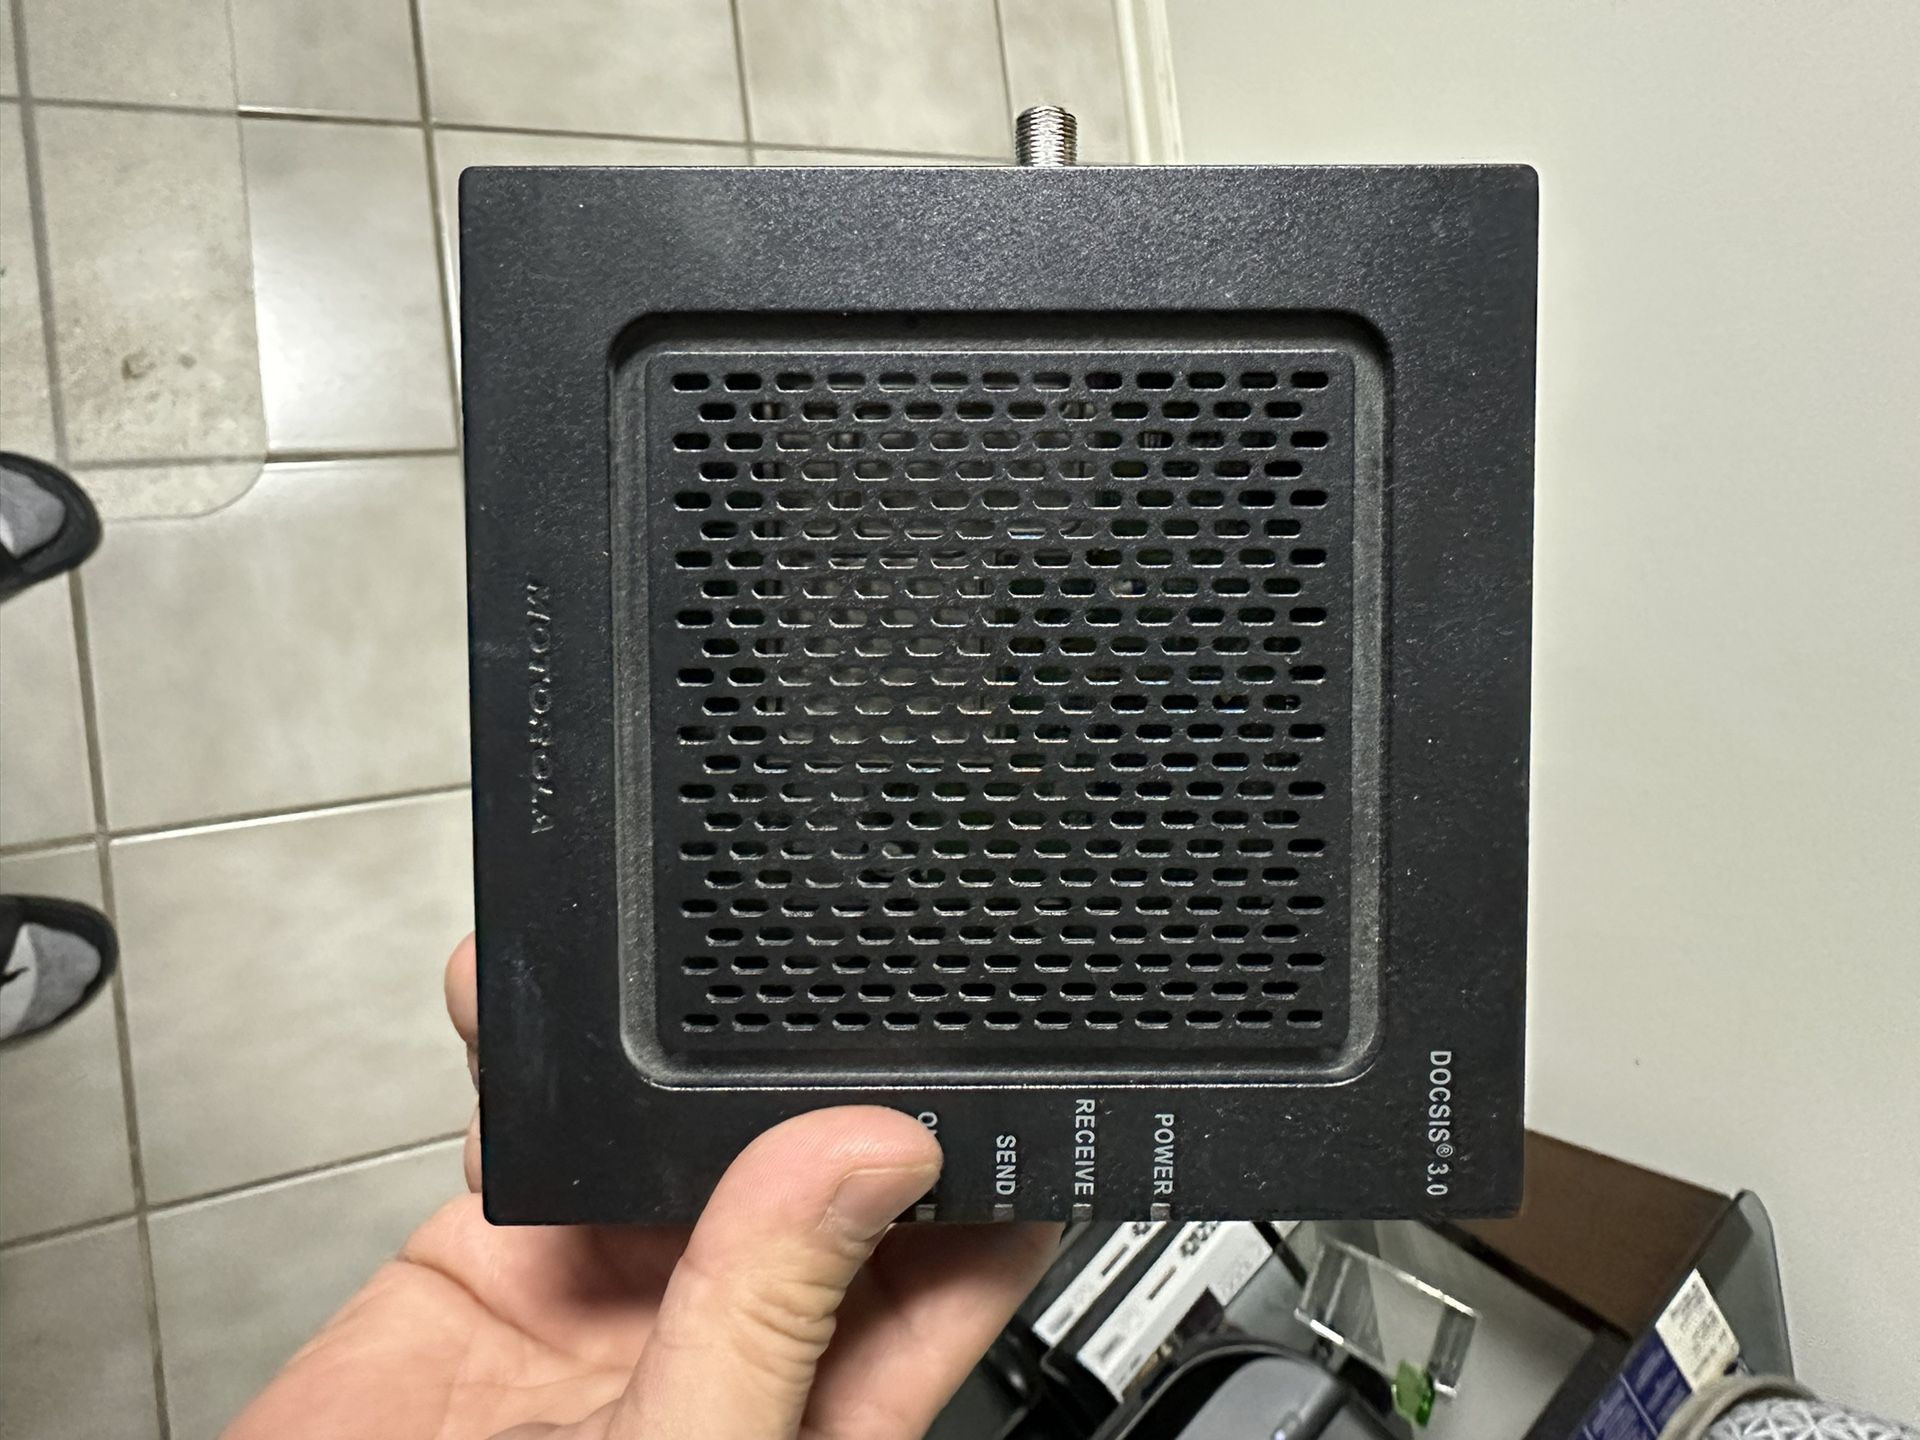 Motorola Cable Modem - No Charger